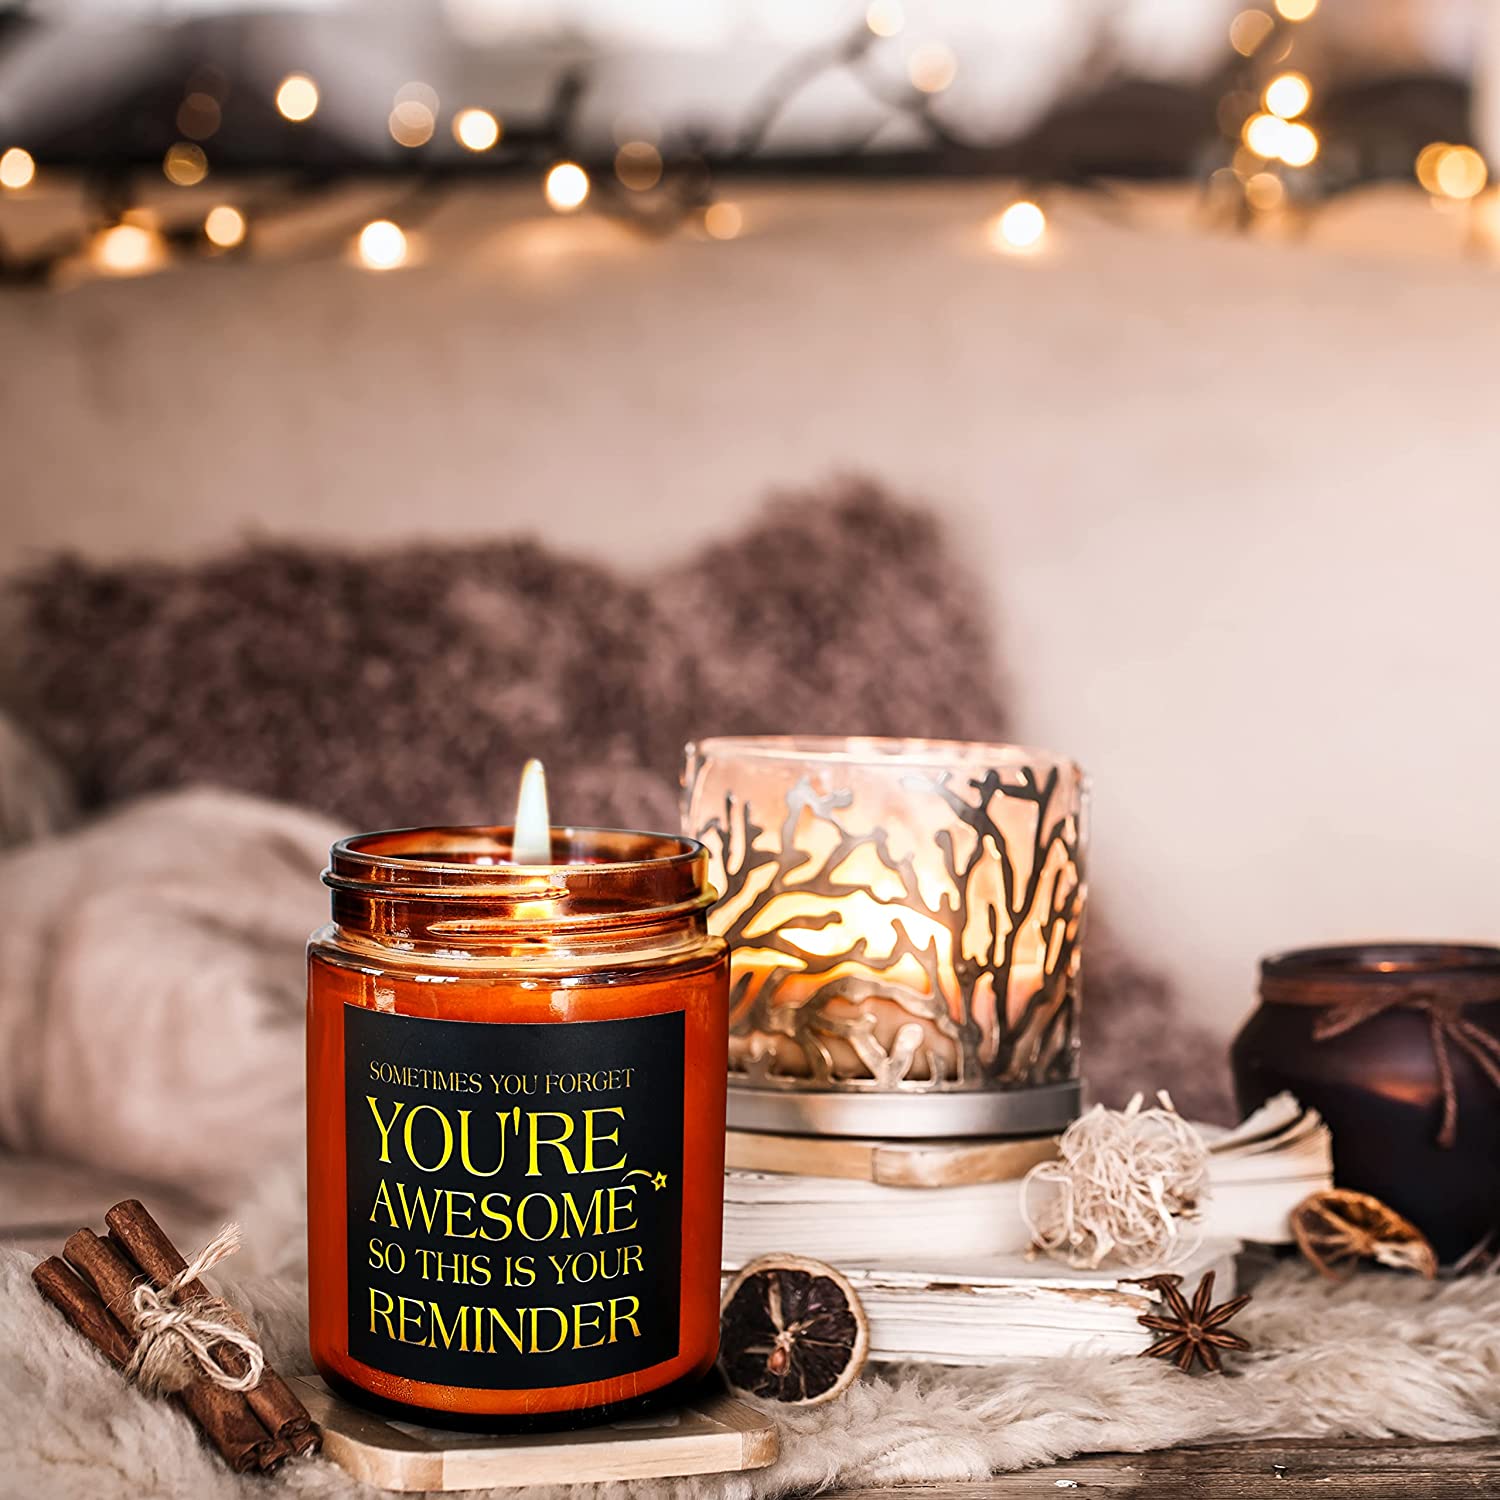 Light up someone's life with this awesome candle. –